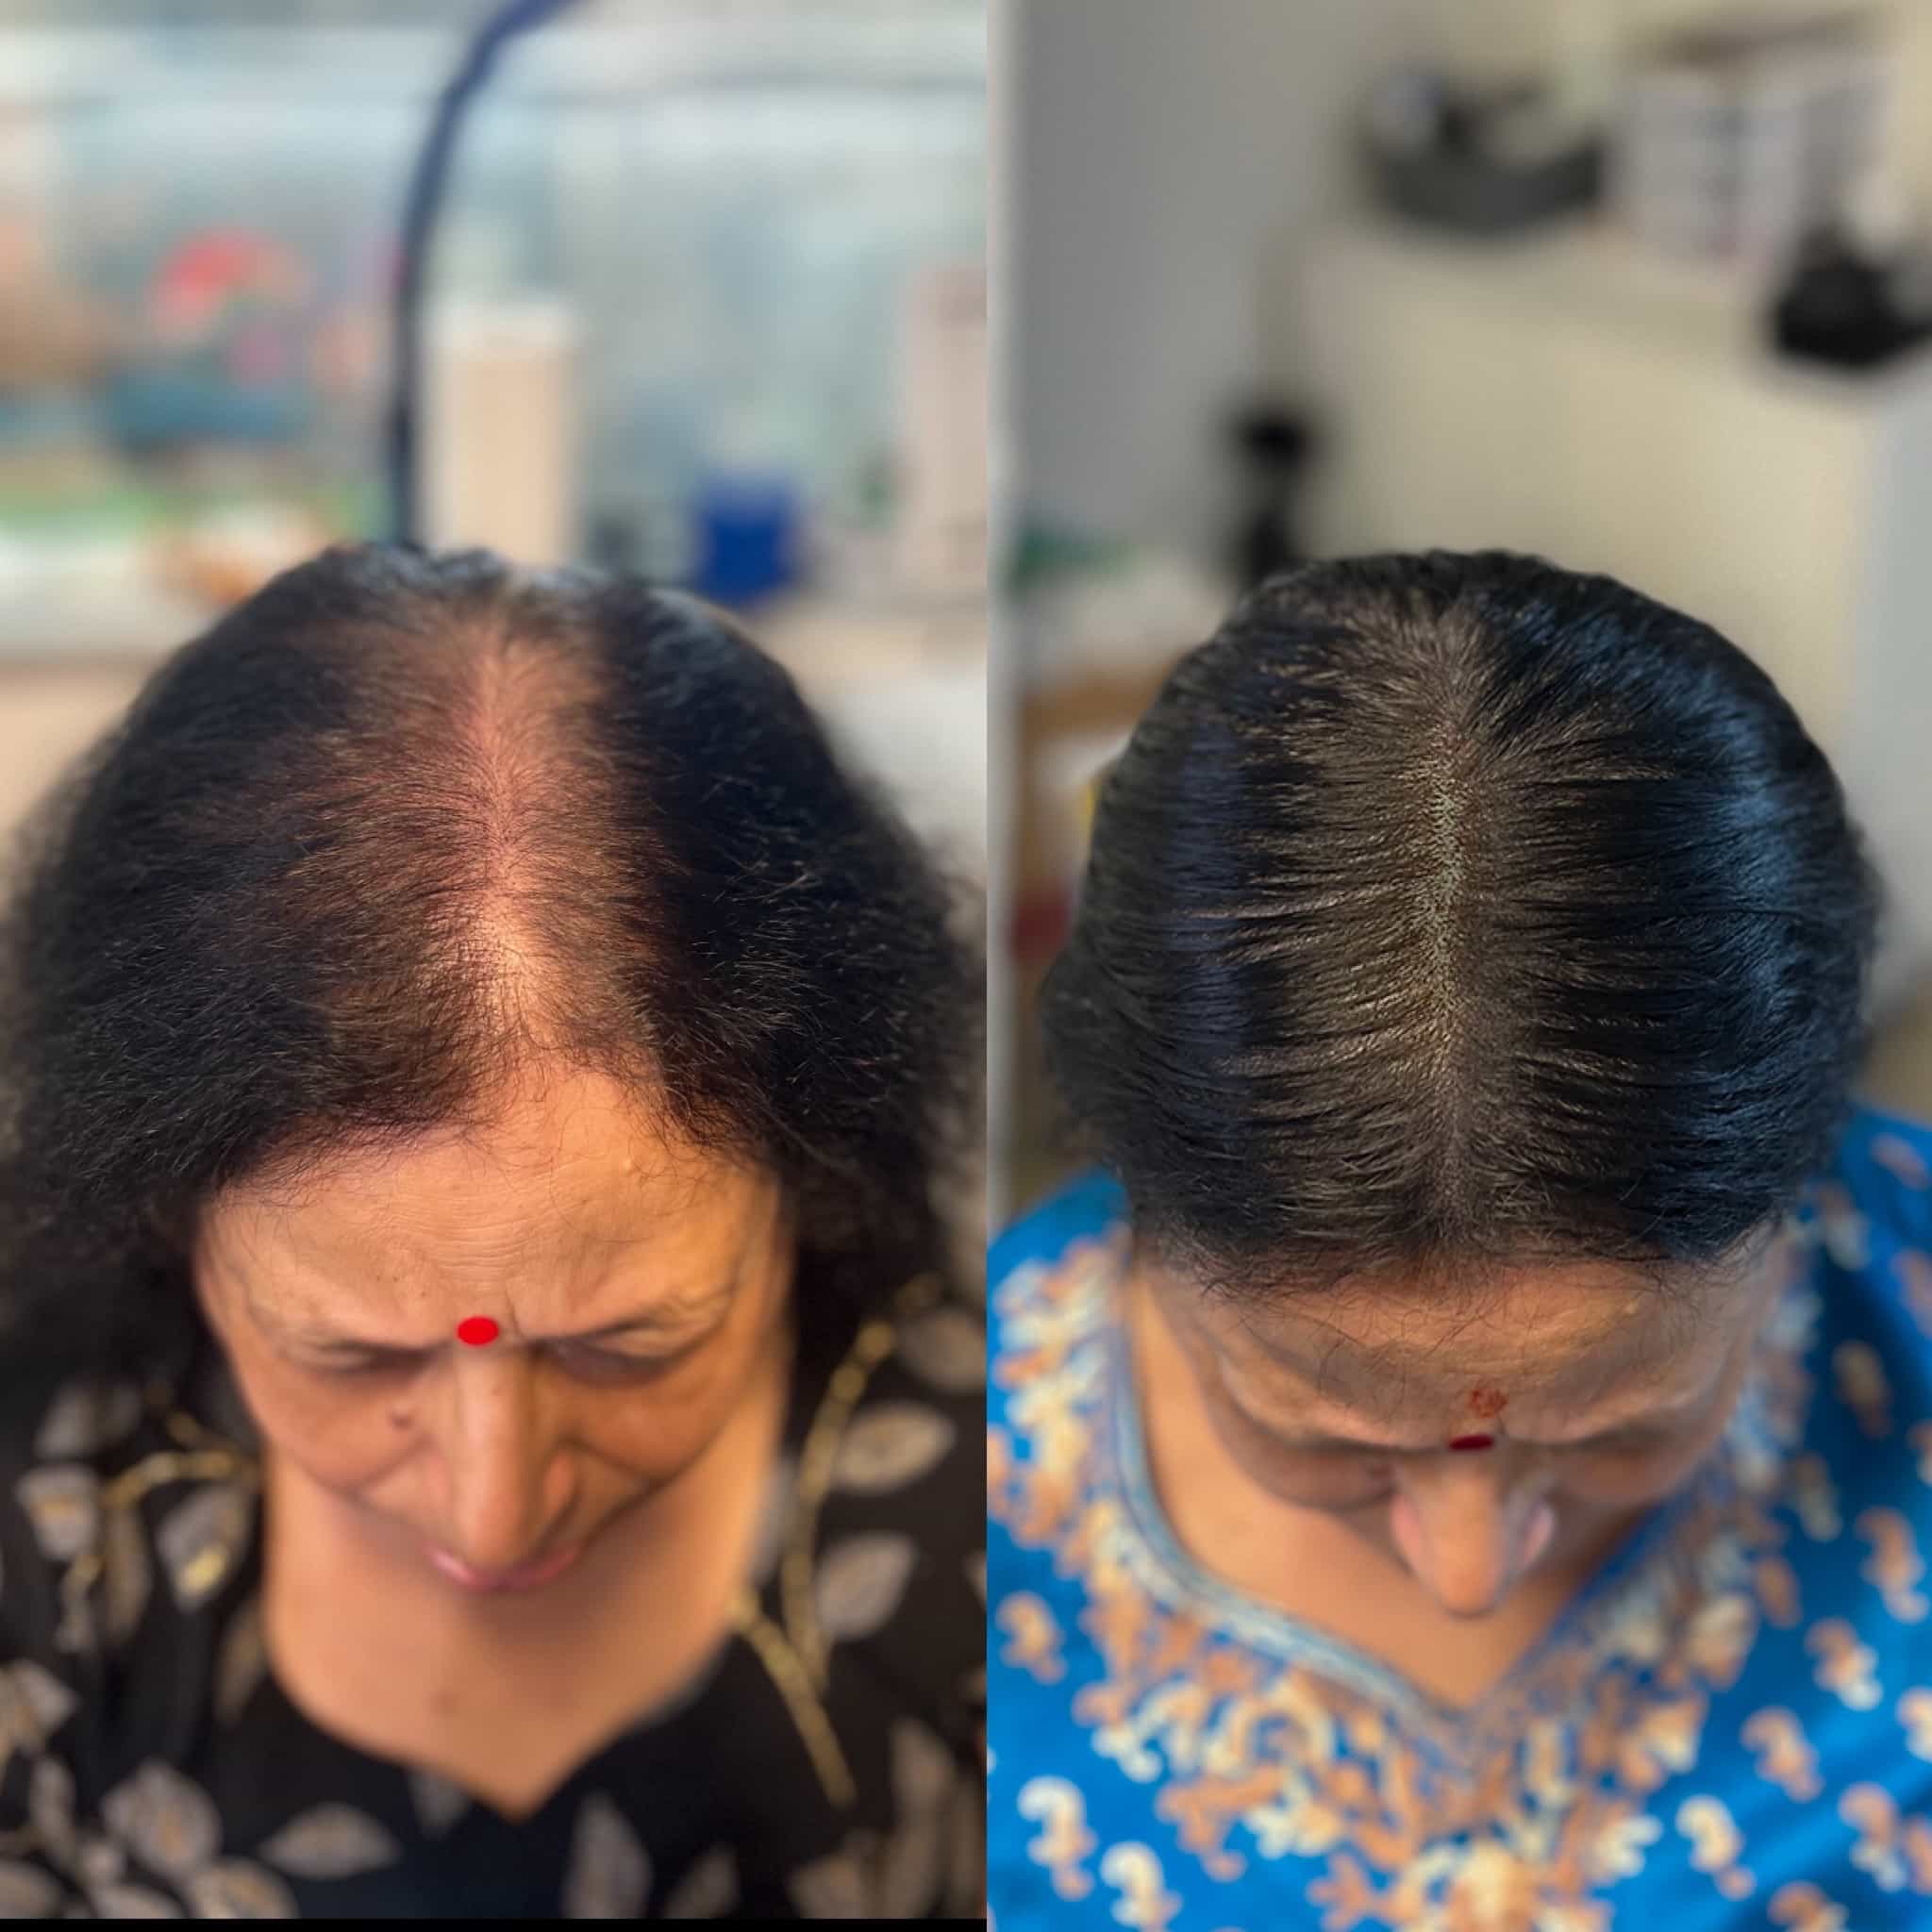 Client's before and after photos after hair tattoo/scalp micropigmentation